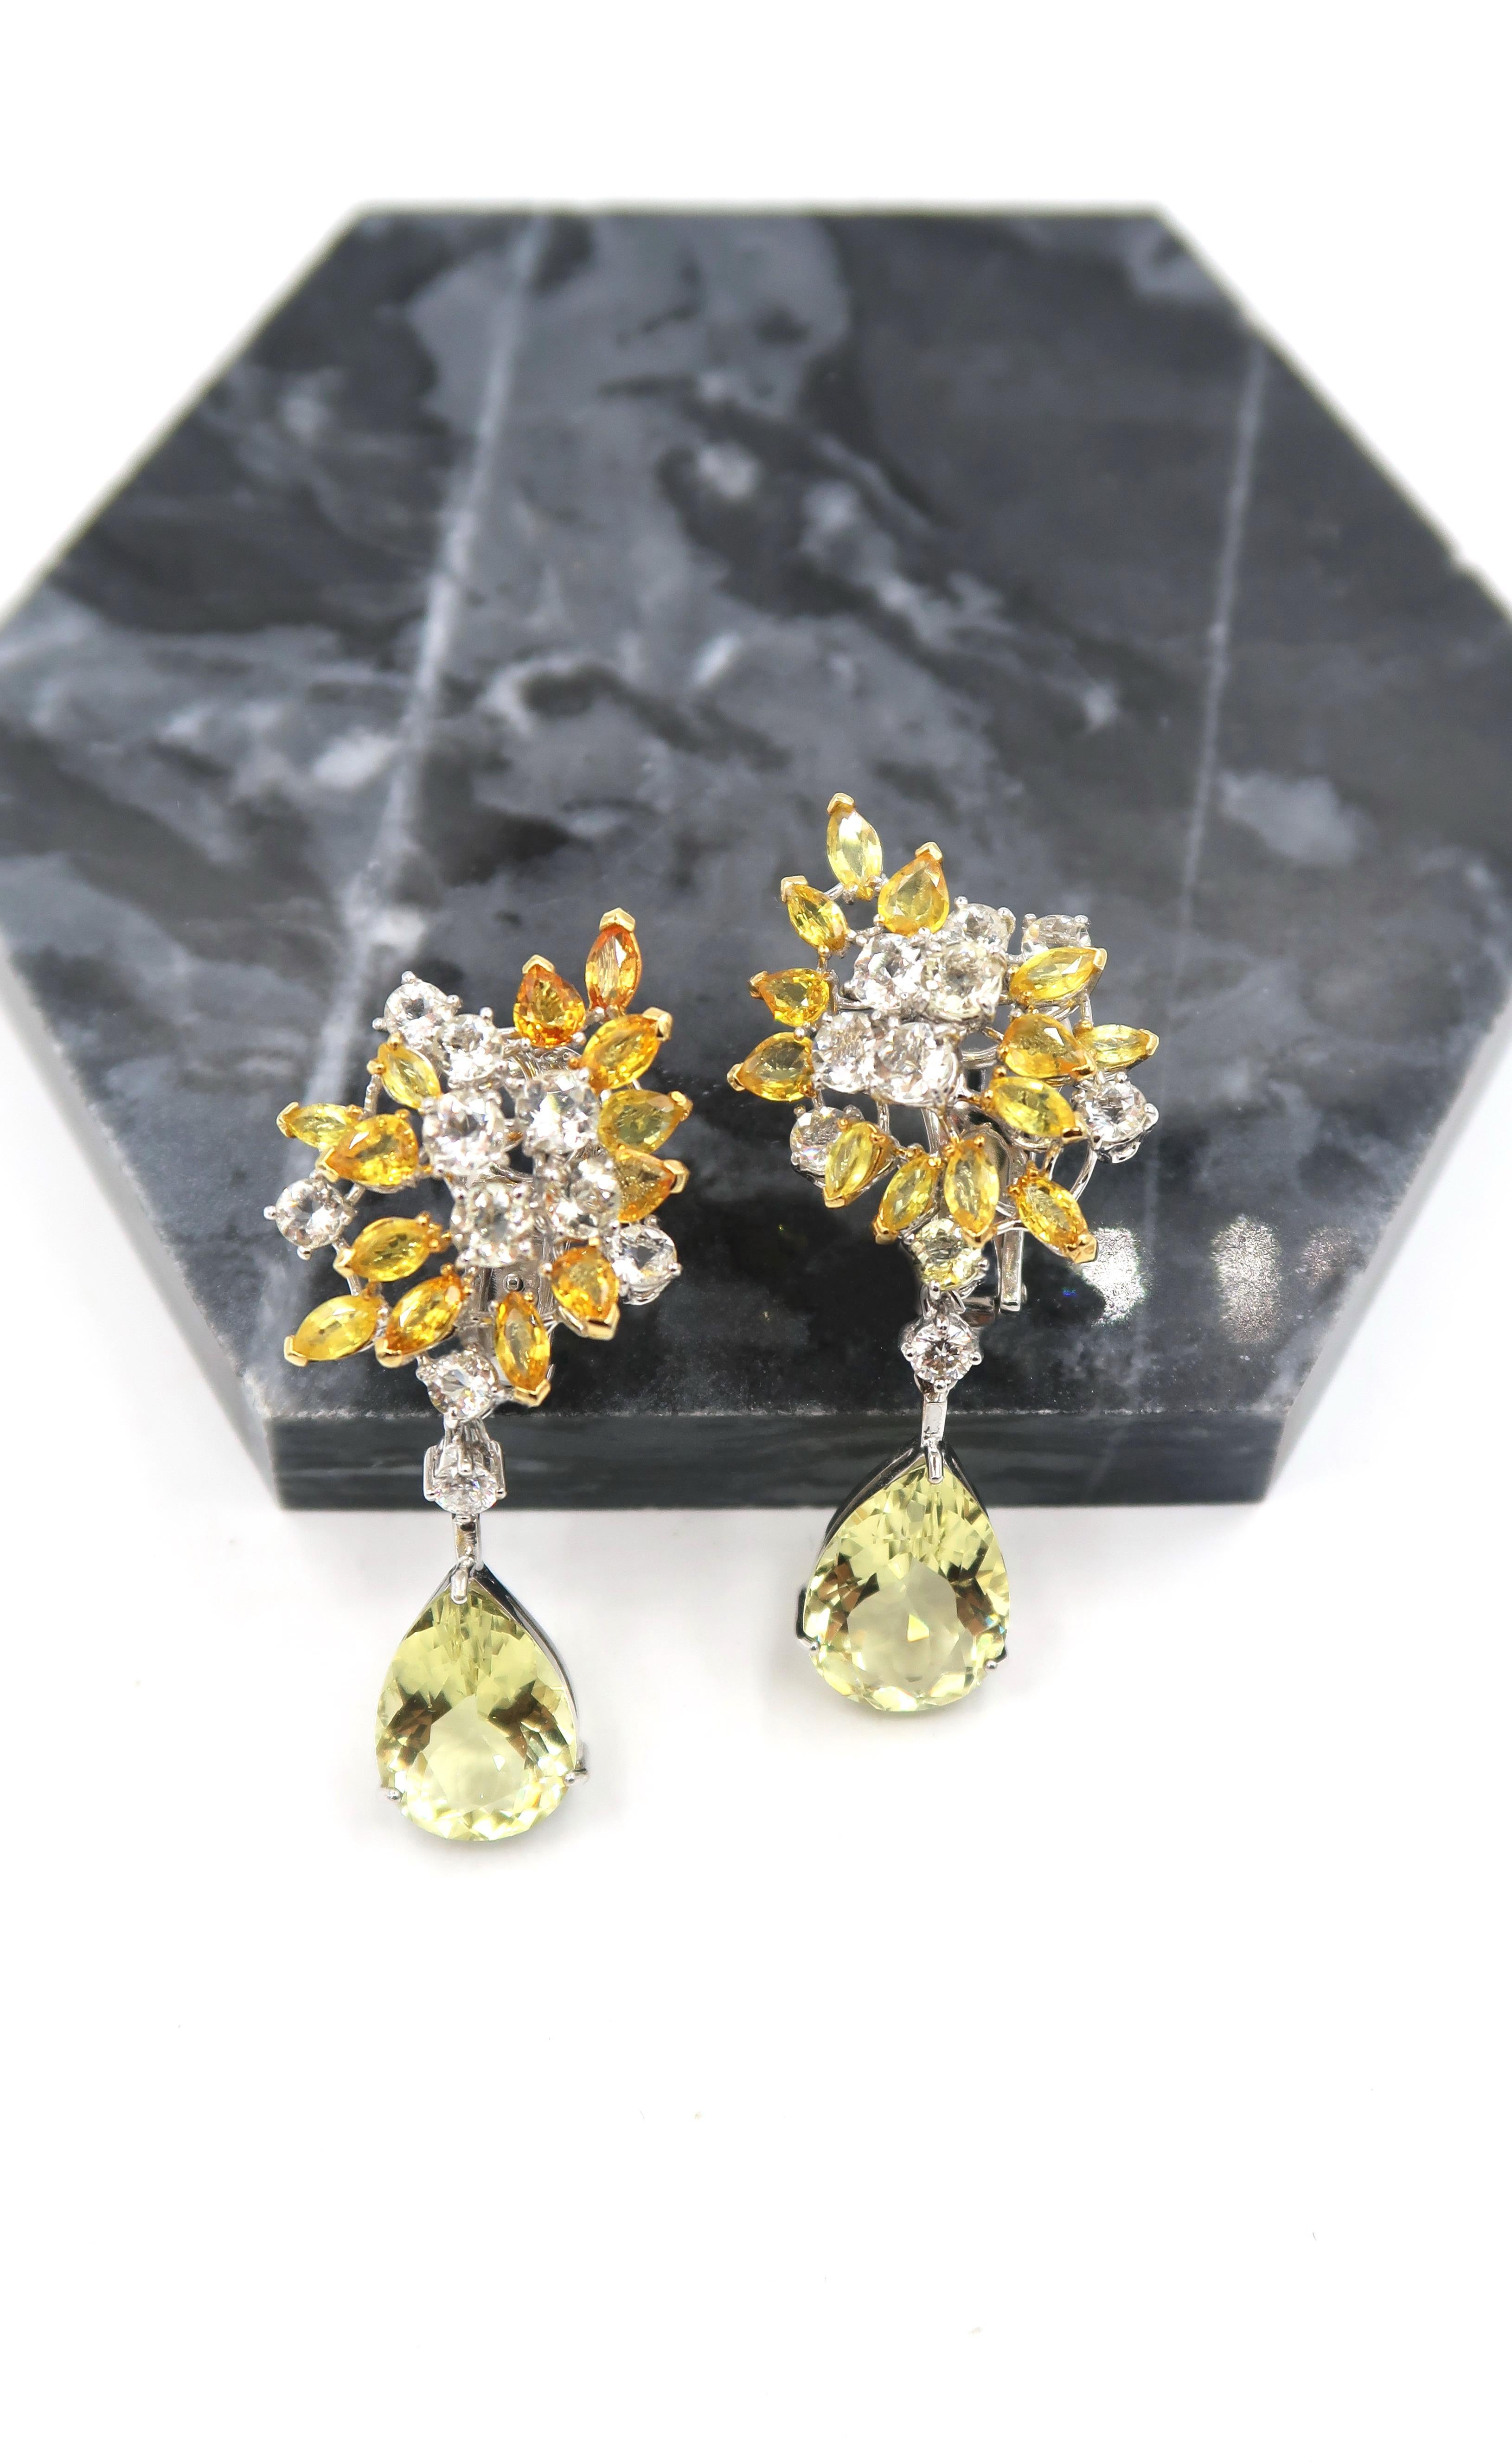 Yellow White Sapphire Diamond Cluster 18k Gold Earrings with Yellow Beryl Drops For Sale 2